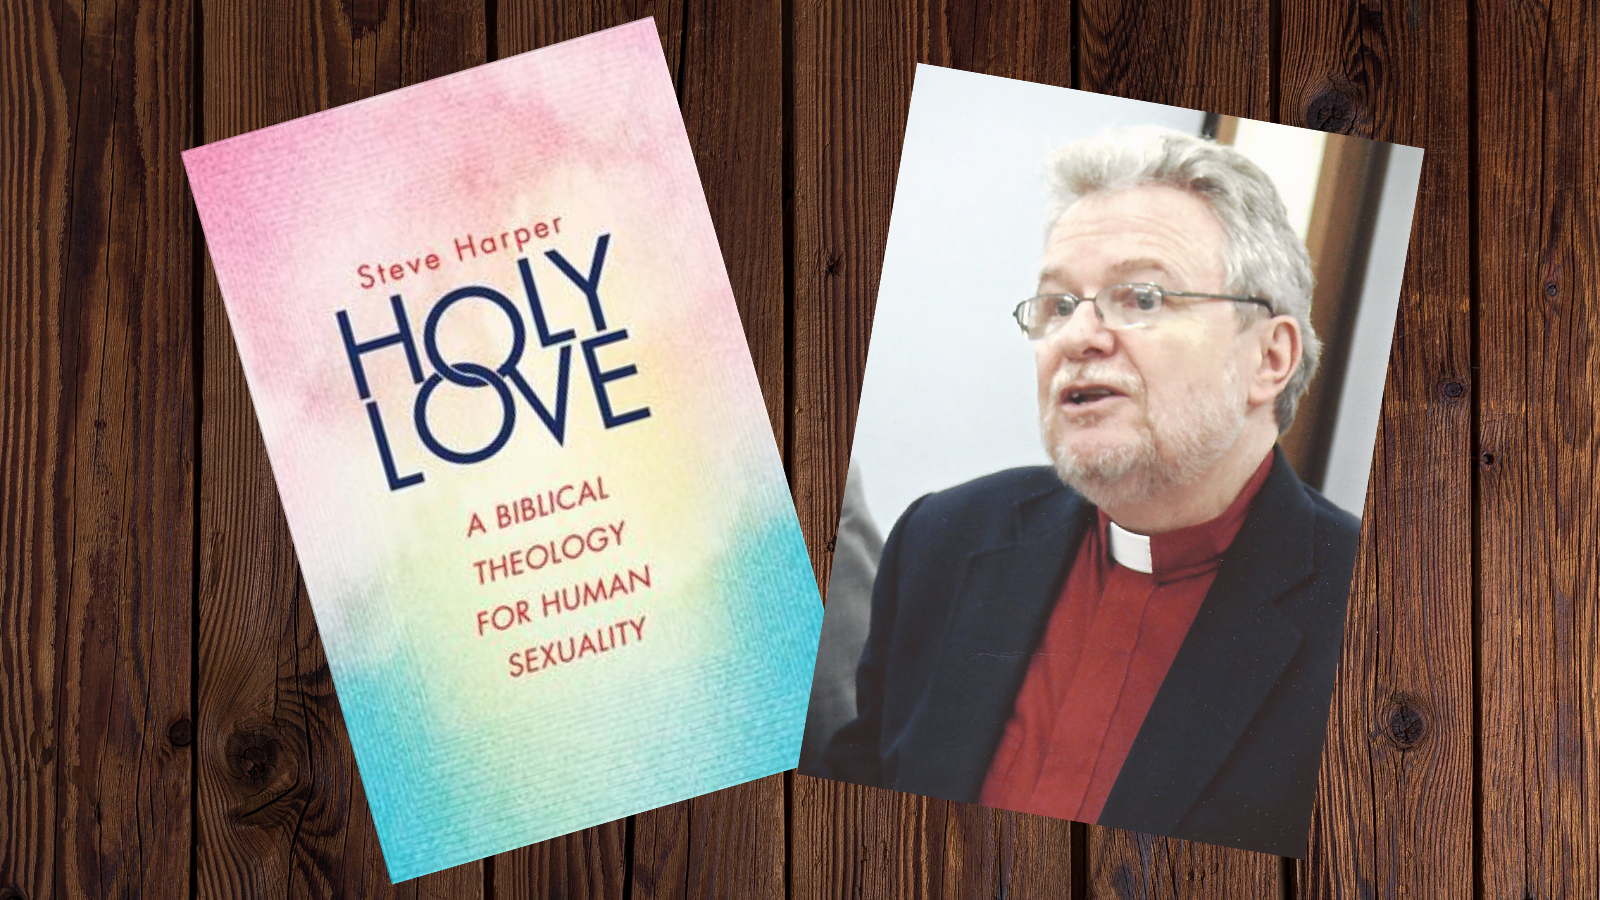 Holy Love book cover and author headshot